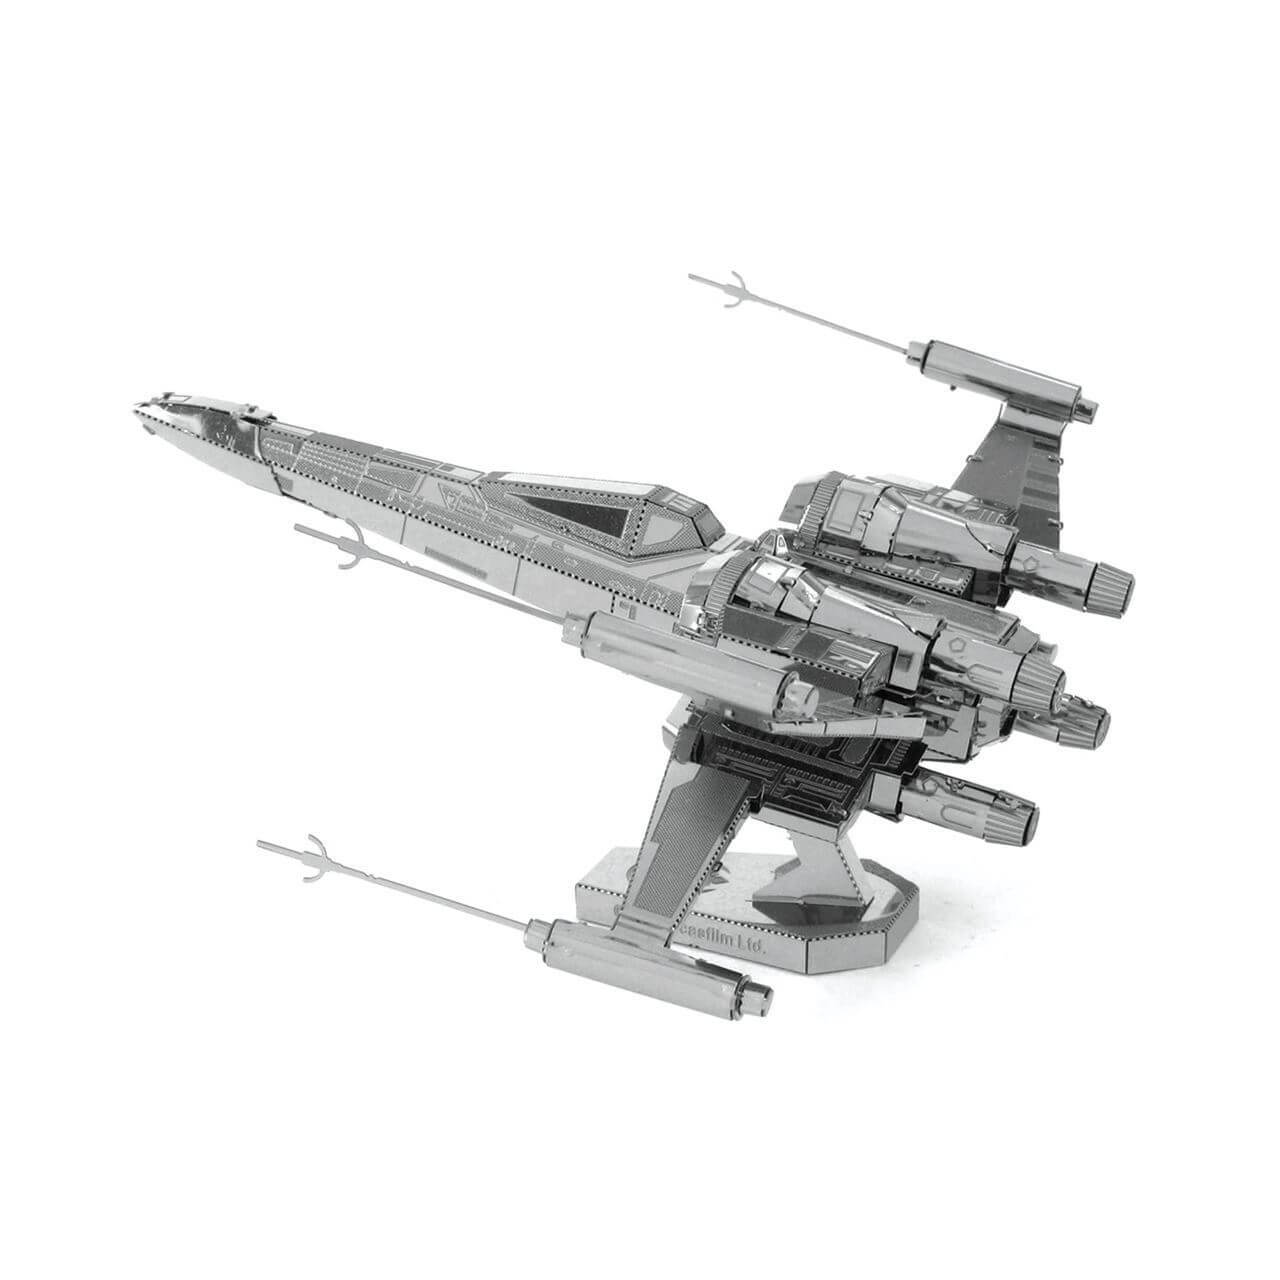 Side view of the Metal Earth Star Wars Poe Dameron's X-Wing Fighter Model - 2 Sheets.